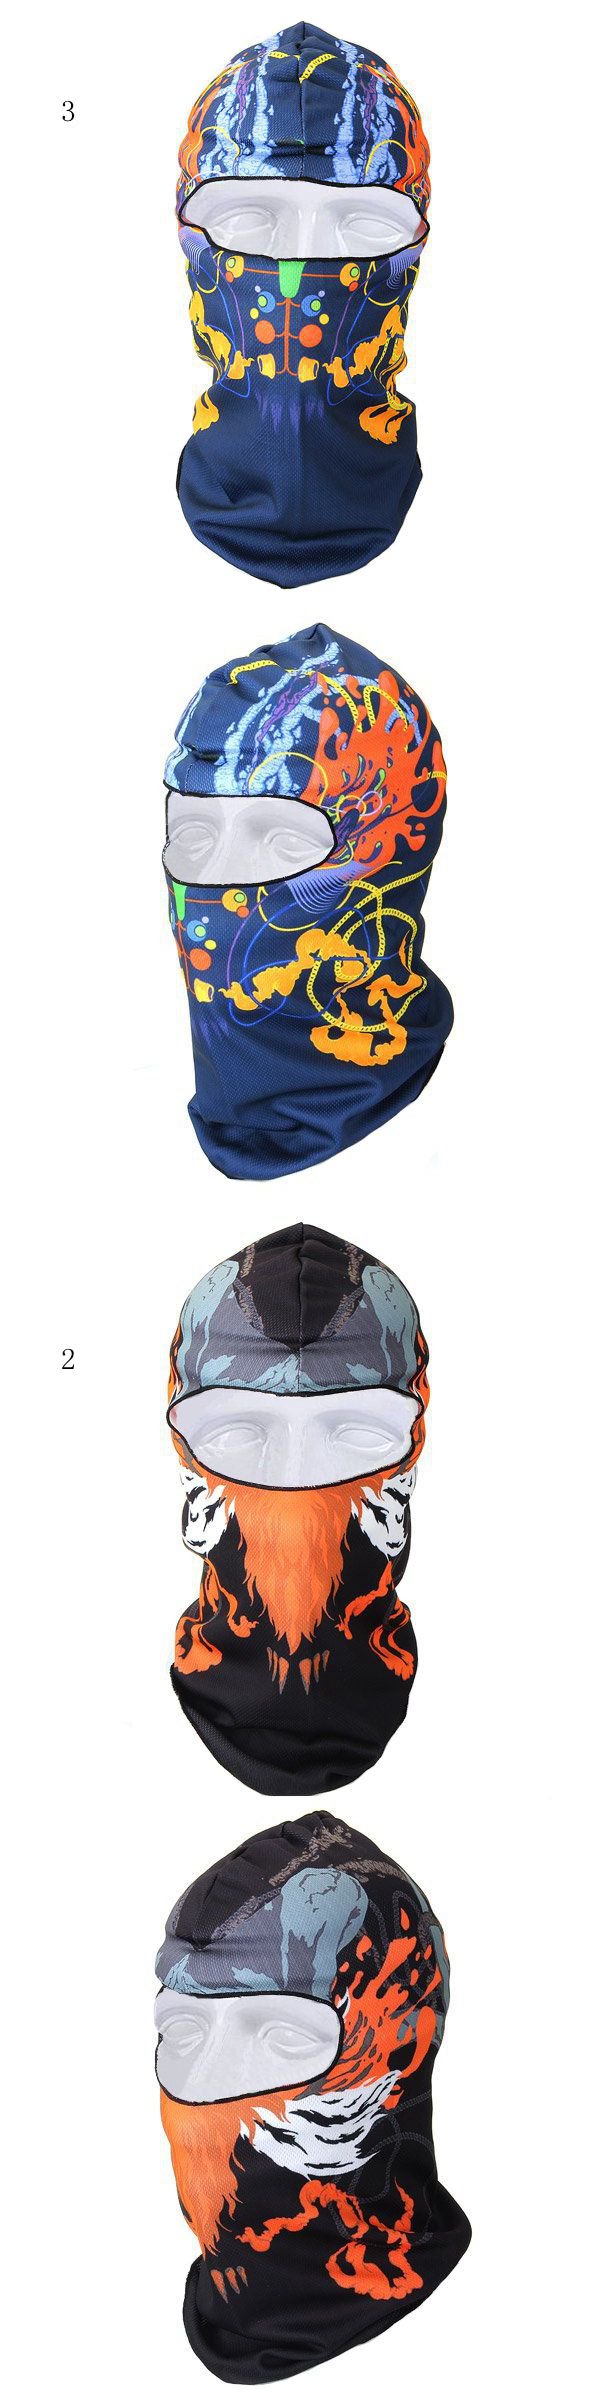 Men-Women-Winter-Neck-Face-Mask-Printed-Skiing-Hat-Cycling-Caps-1021402-3